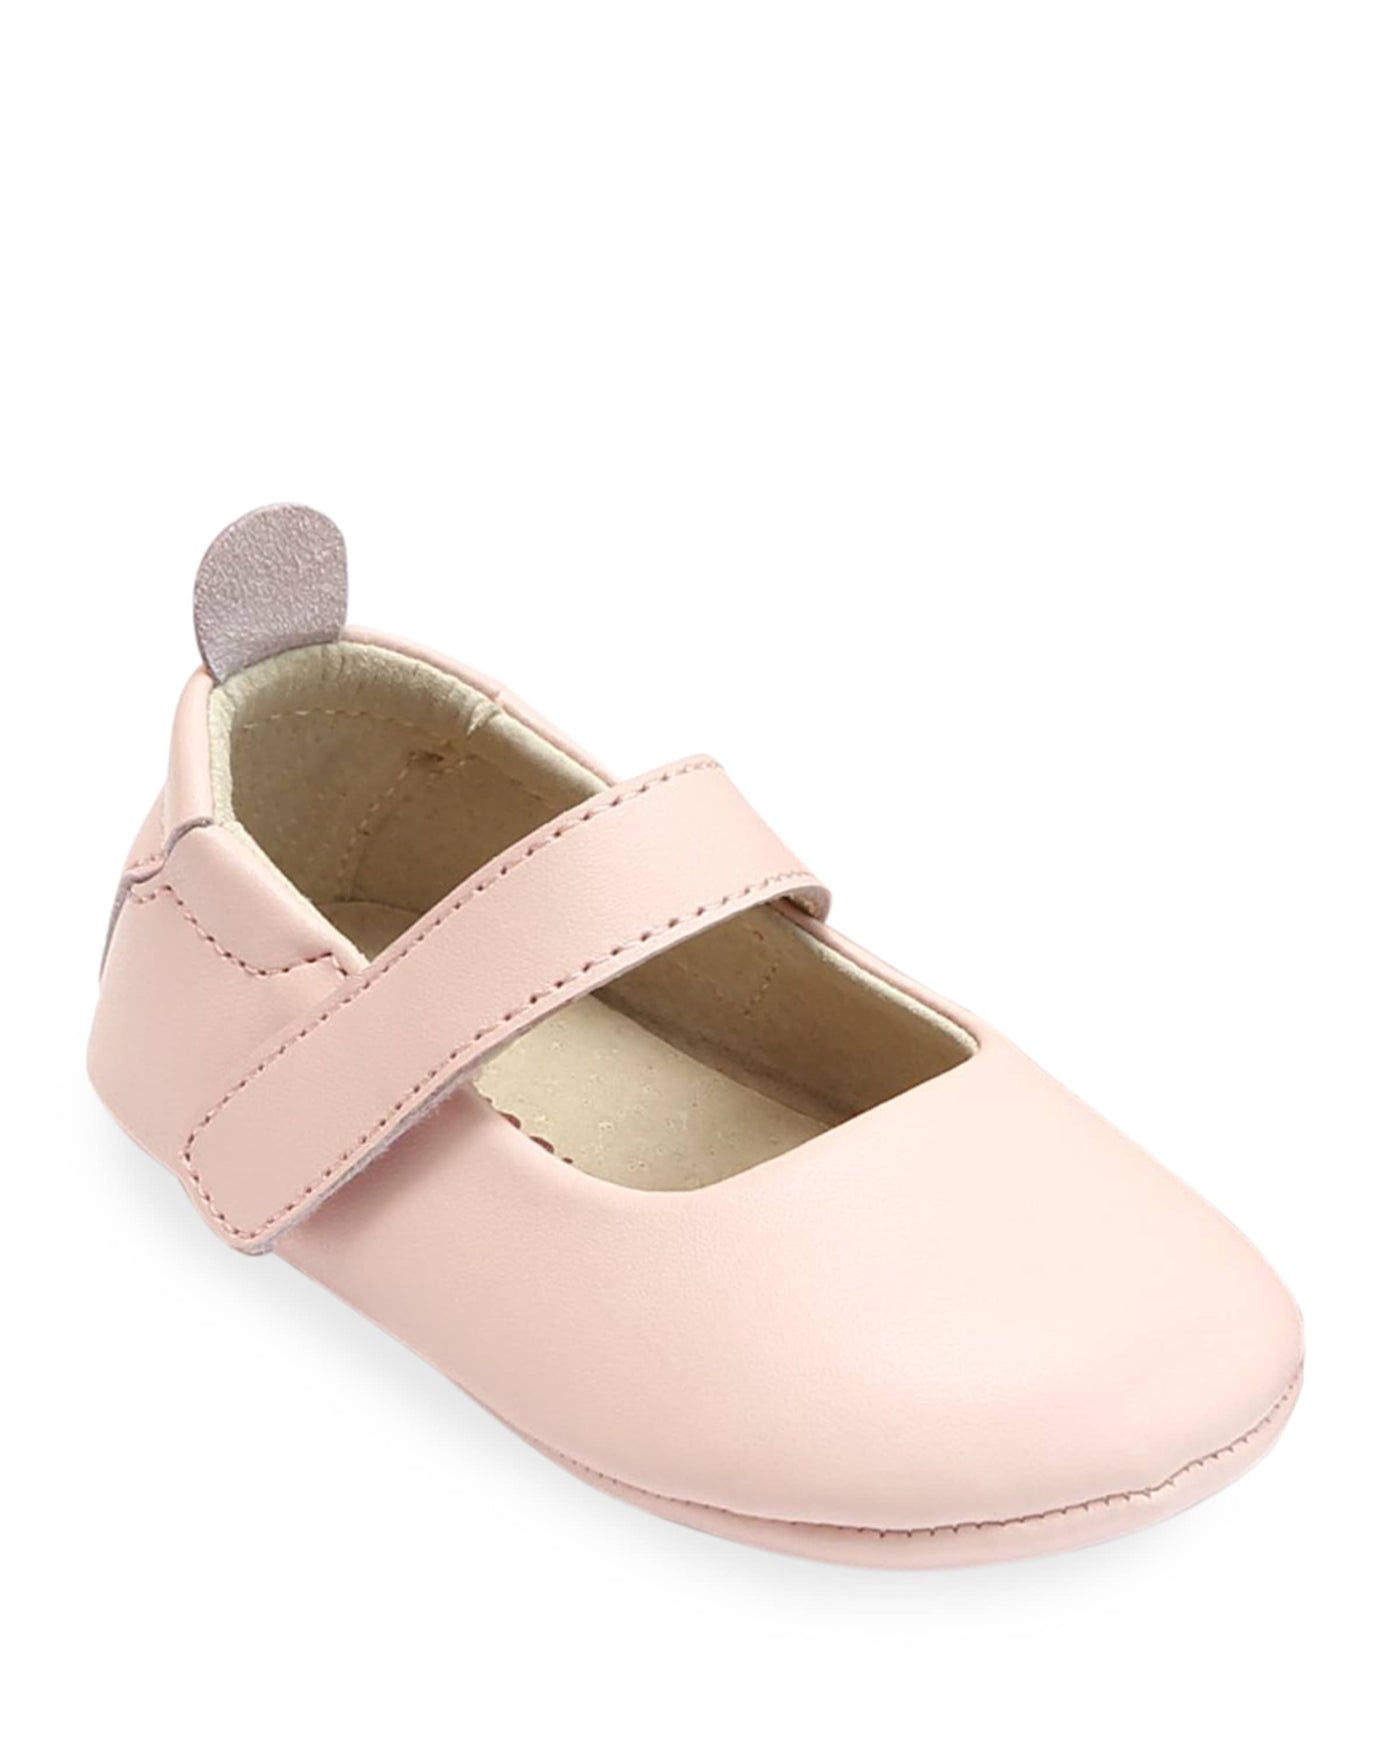 Charlotte Soft Leather Infant Mary Jane 3510 - Pink